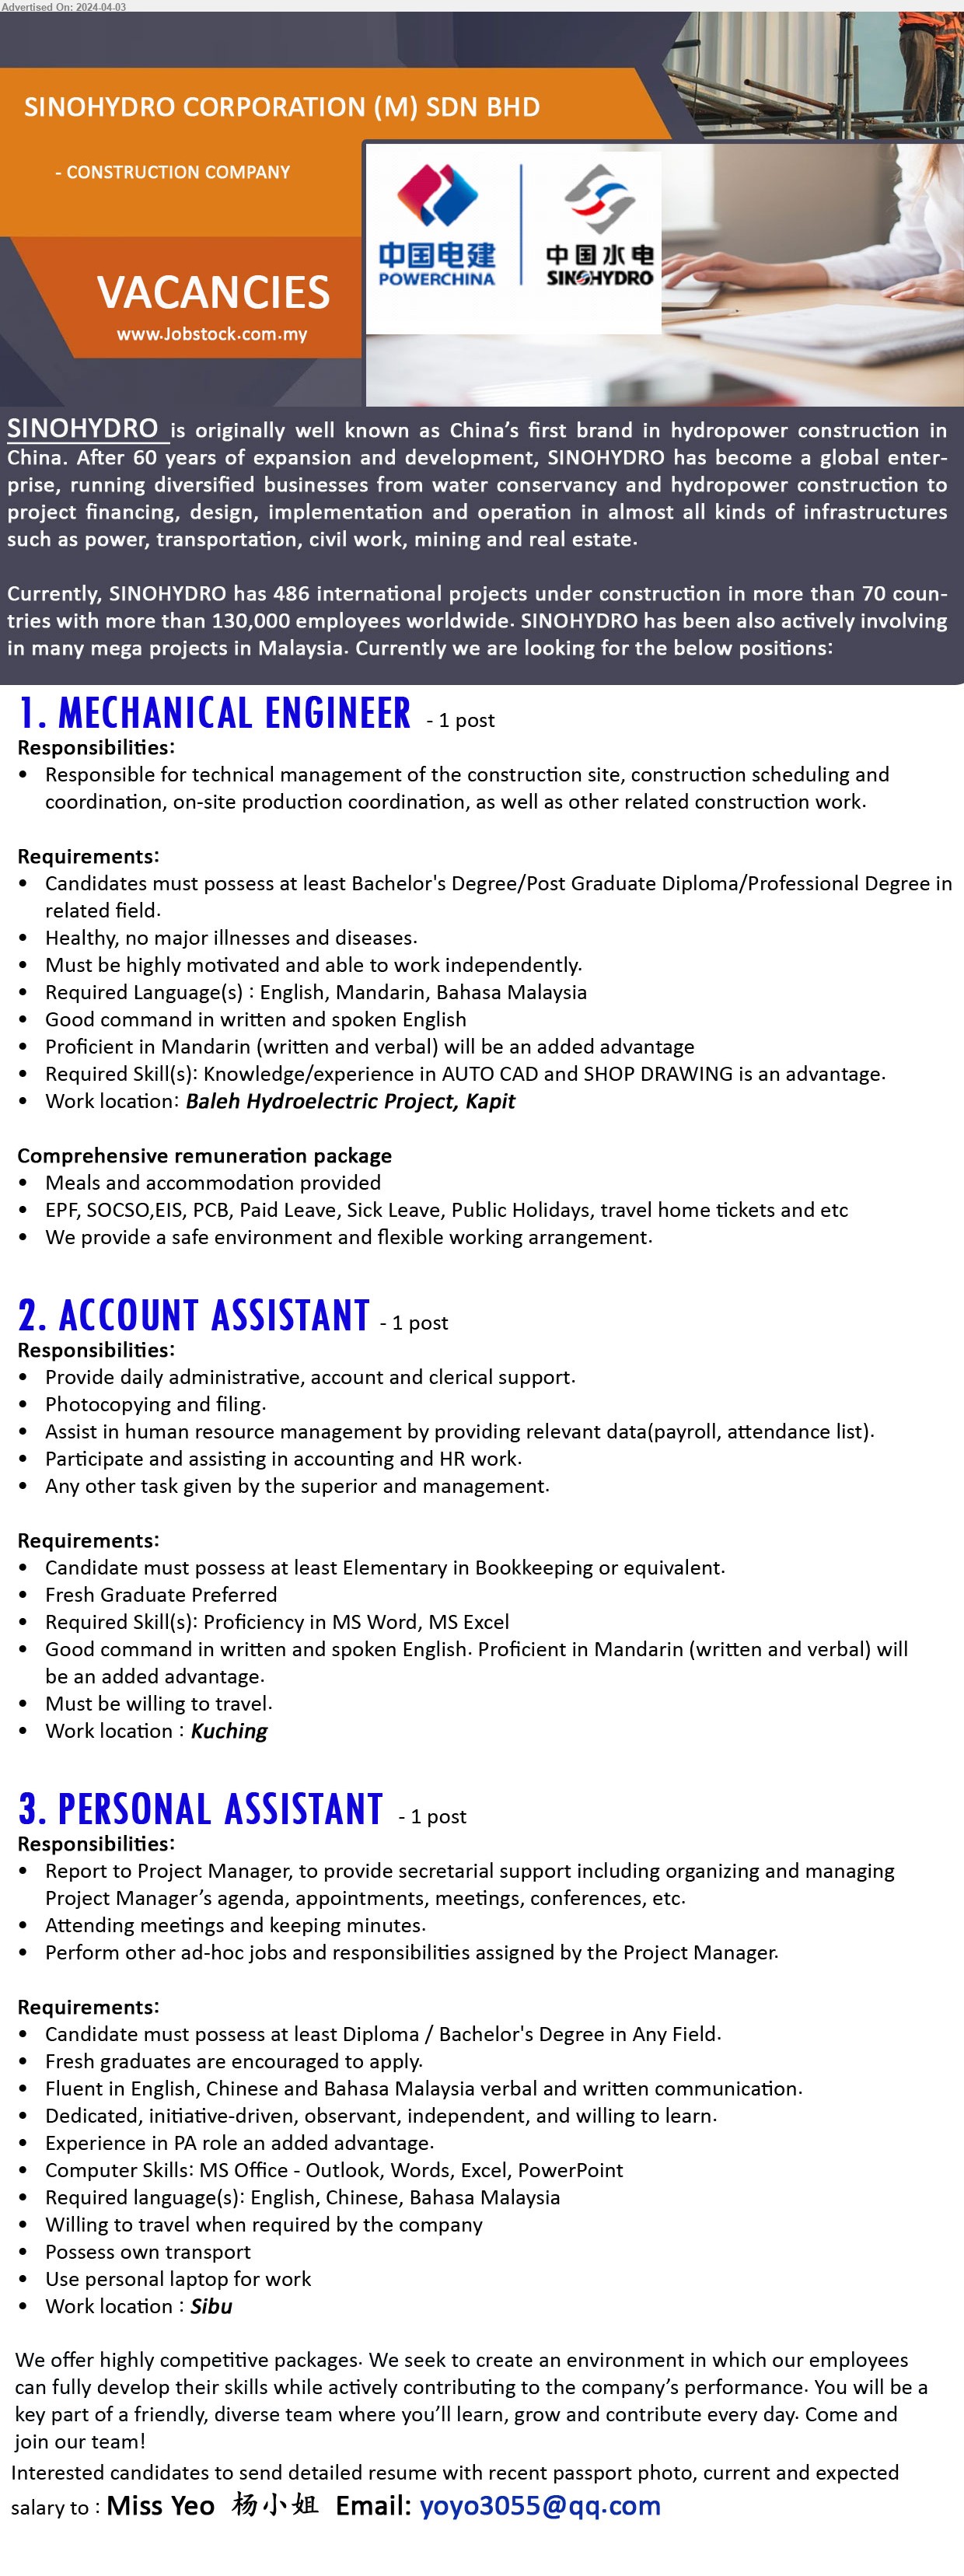 SINOHYDRO CORPORATION (M) SDN BHD - 1. MECHANICAL ENGINEER (Baleh Hydroelectric Project, Kapit), Bachelor's Degree/Post Graduate Diploma/Professional Degree, Knowledge/experience in AUTO CAD and SHOP DRAWING is an advantage,...
2. ACCOUNT ASSISTANT (Kuching), Elementary in Bookkeeping, resh Graduate Preferred, Required Skill(s): Proficiency in MS Word, MS Excel,...
3. PERSONAL ASSISTANT (Sibu),  Diploma / Bachelor's Degree, Computer Skills: MS Office - Outlook, Words, Excel, PowerPoint,...
Email resume to ...